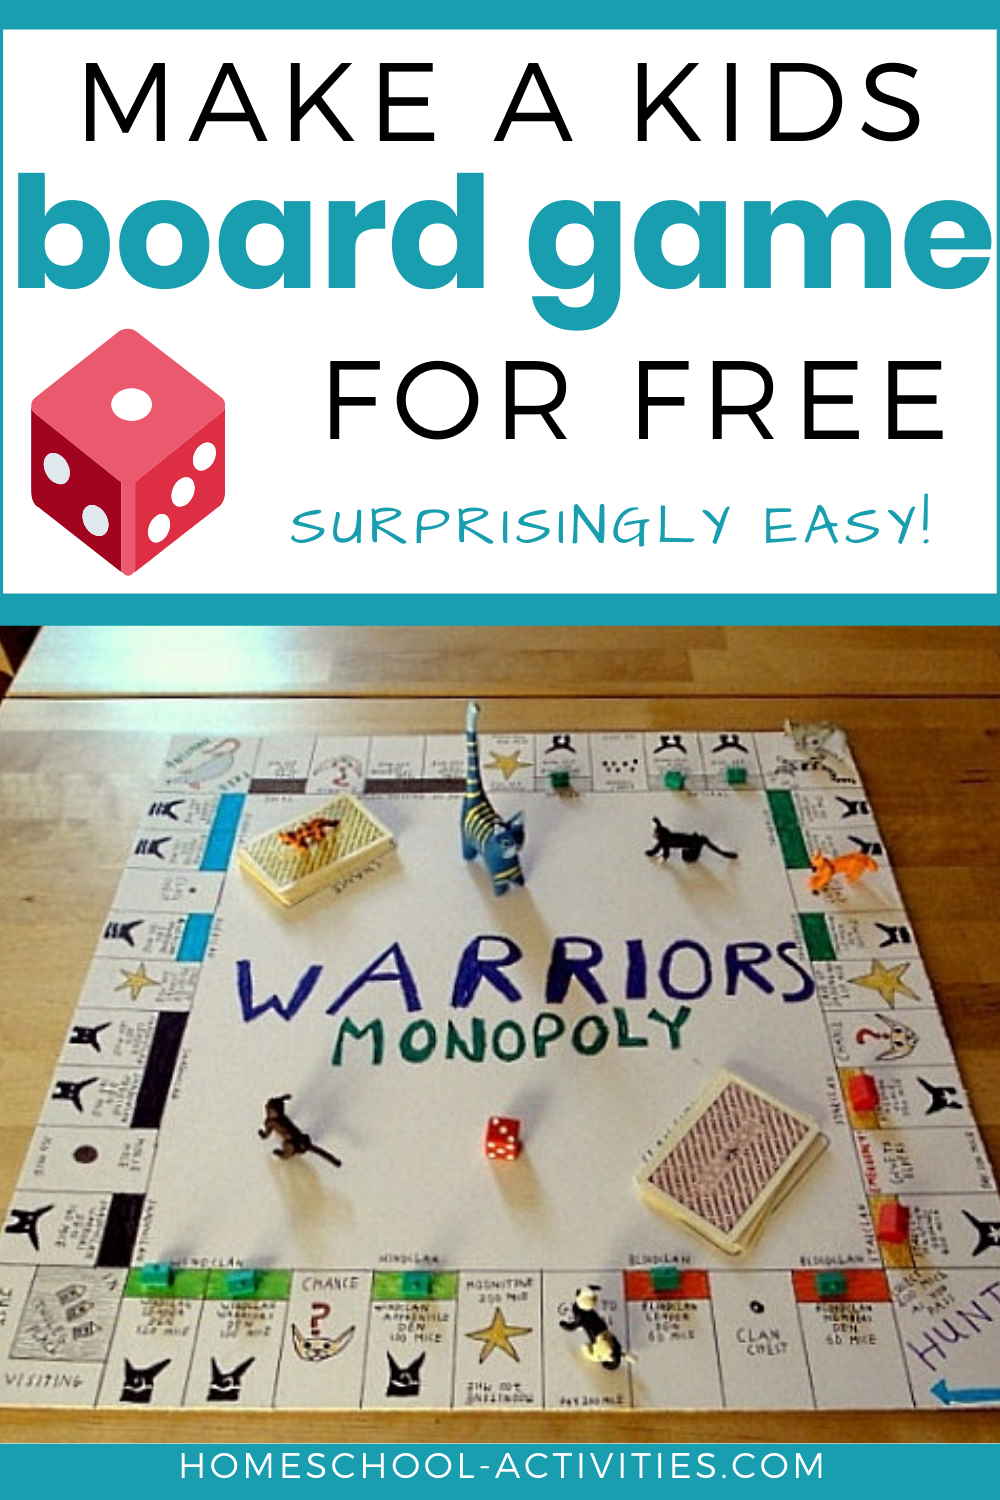 Make a kids board game for free